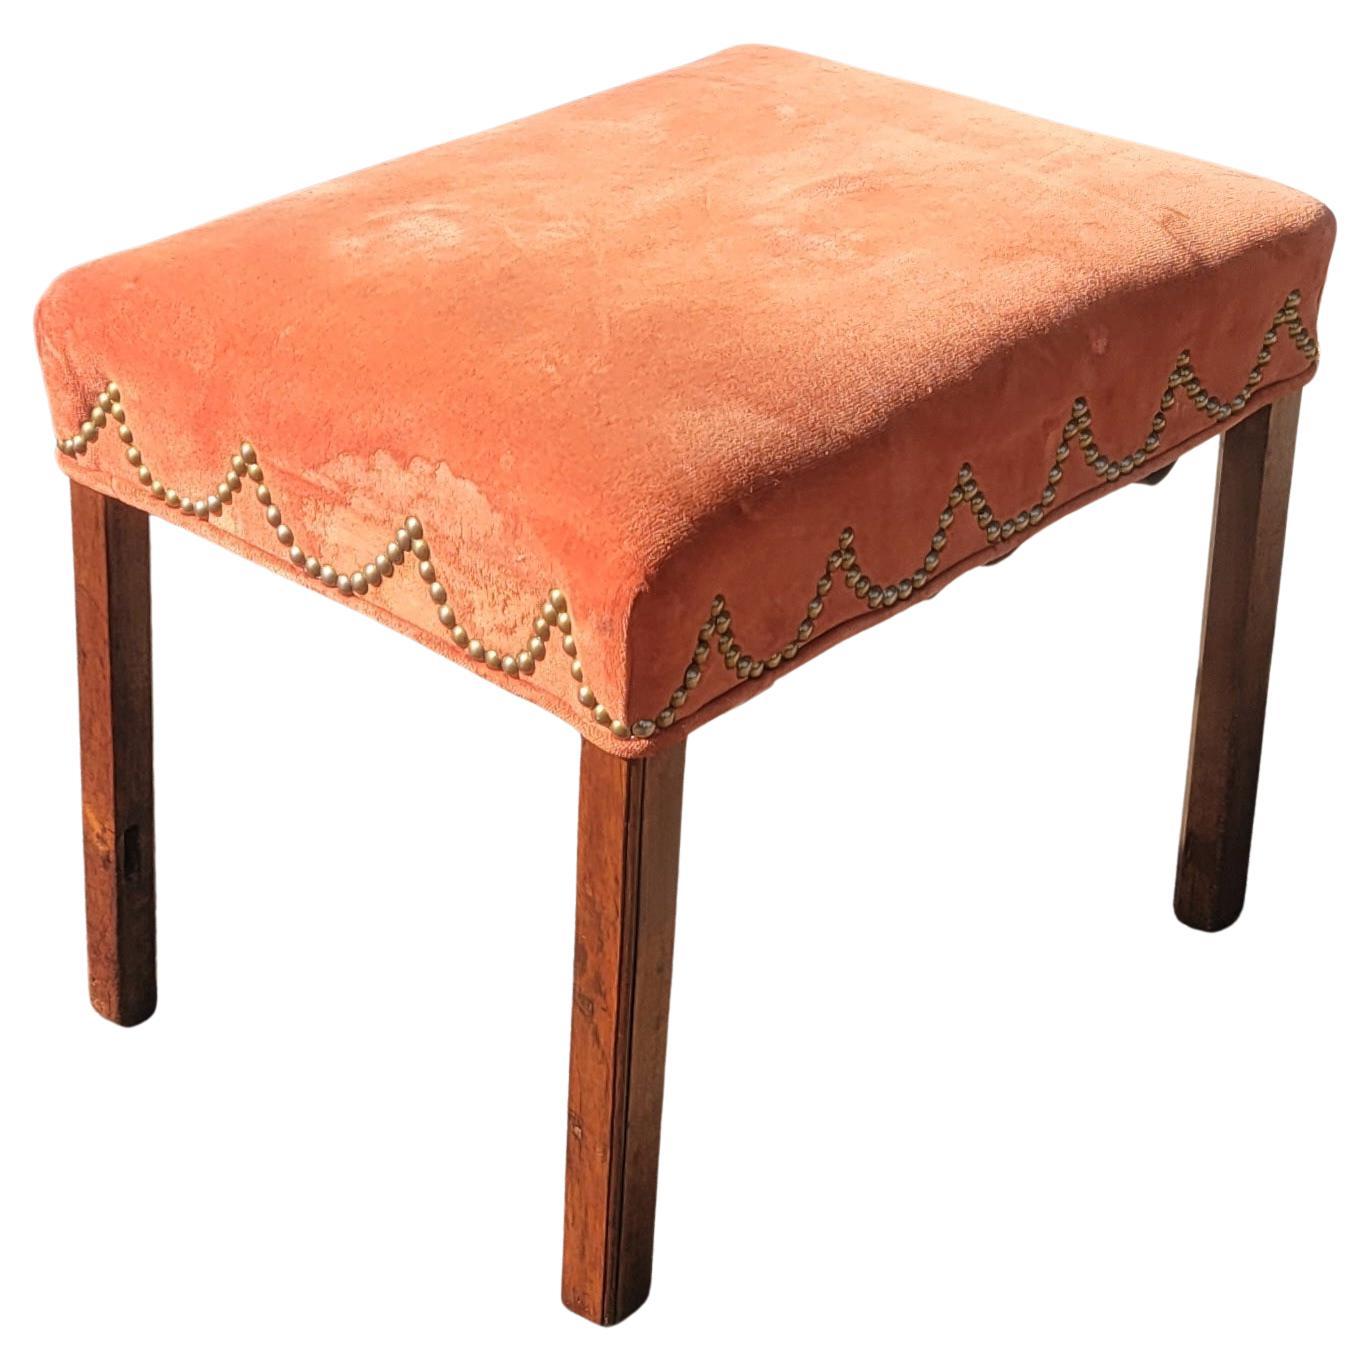 Metal Early 20th C. Mahogany and Velvet Upholstered Stool with Nailhead Trims For Sale